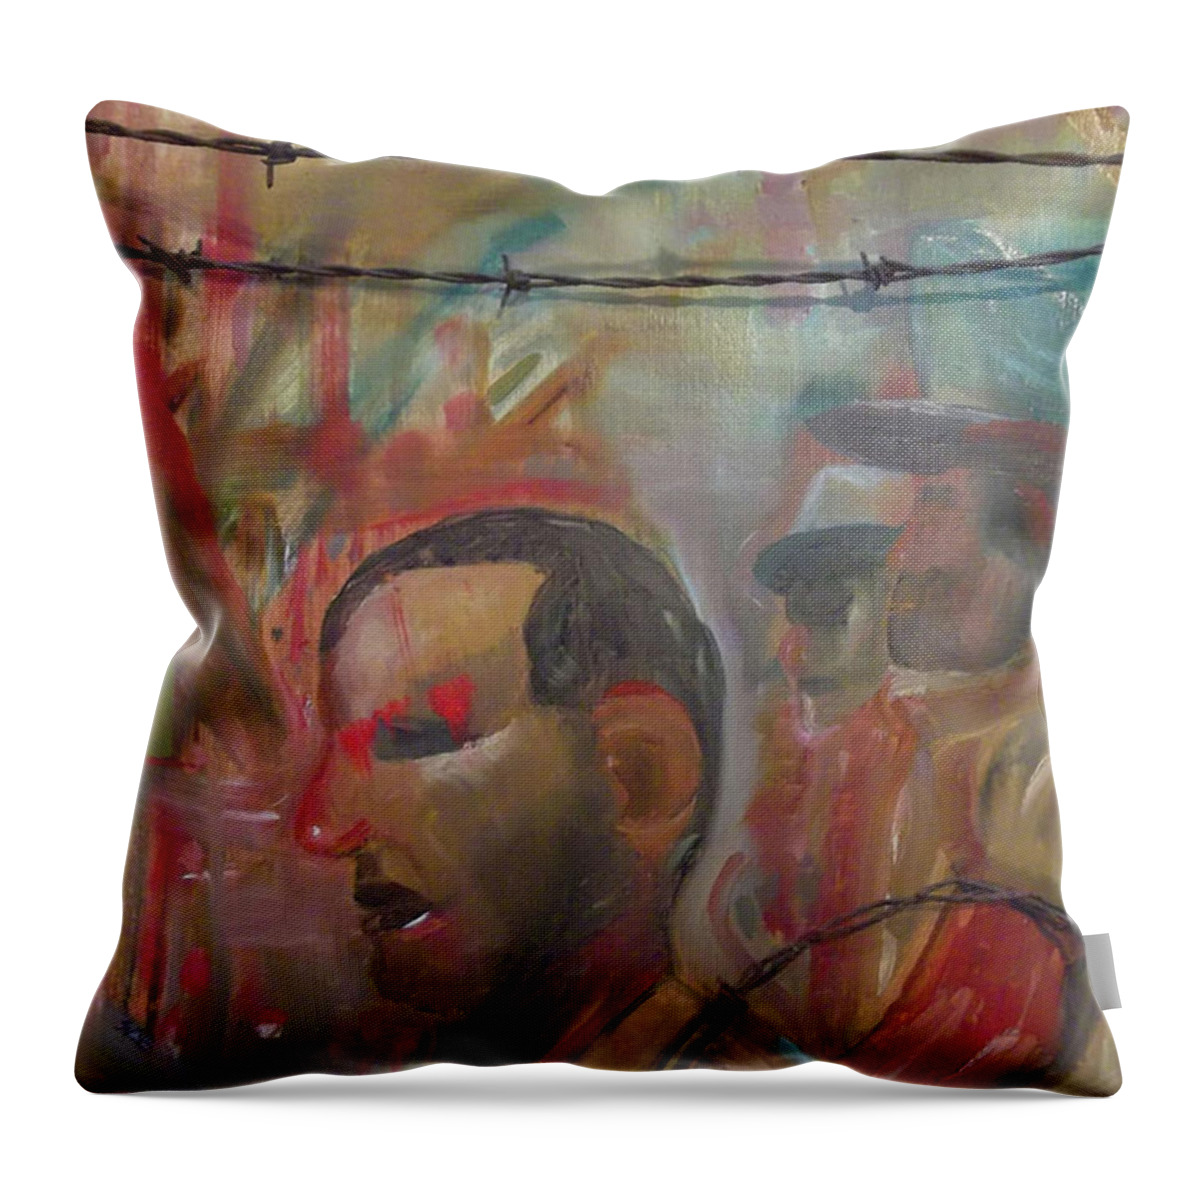 War Throw Pillow featuring the painting Endless Conflict by Susan Esbensen